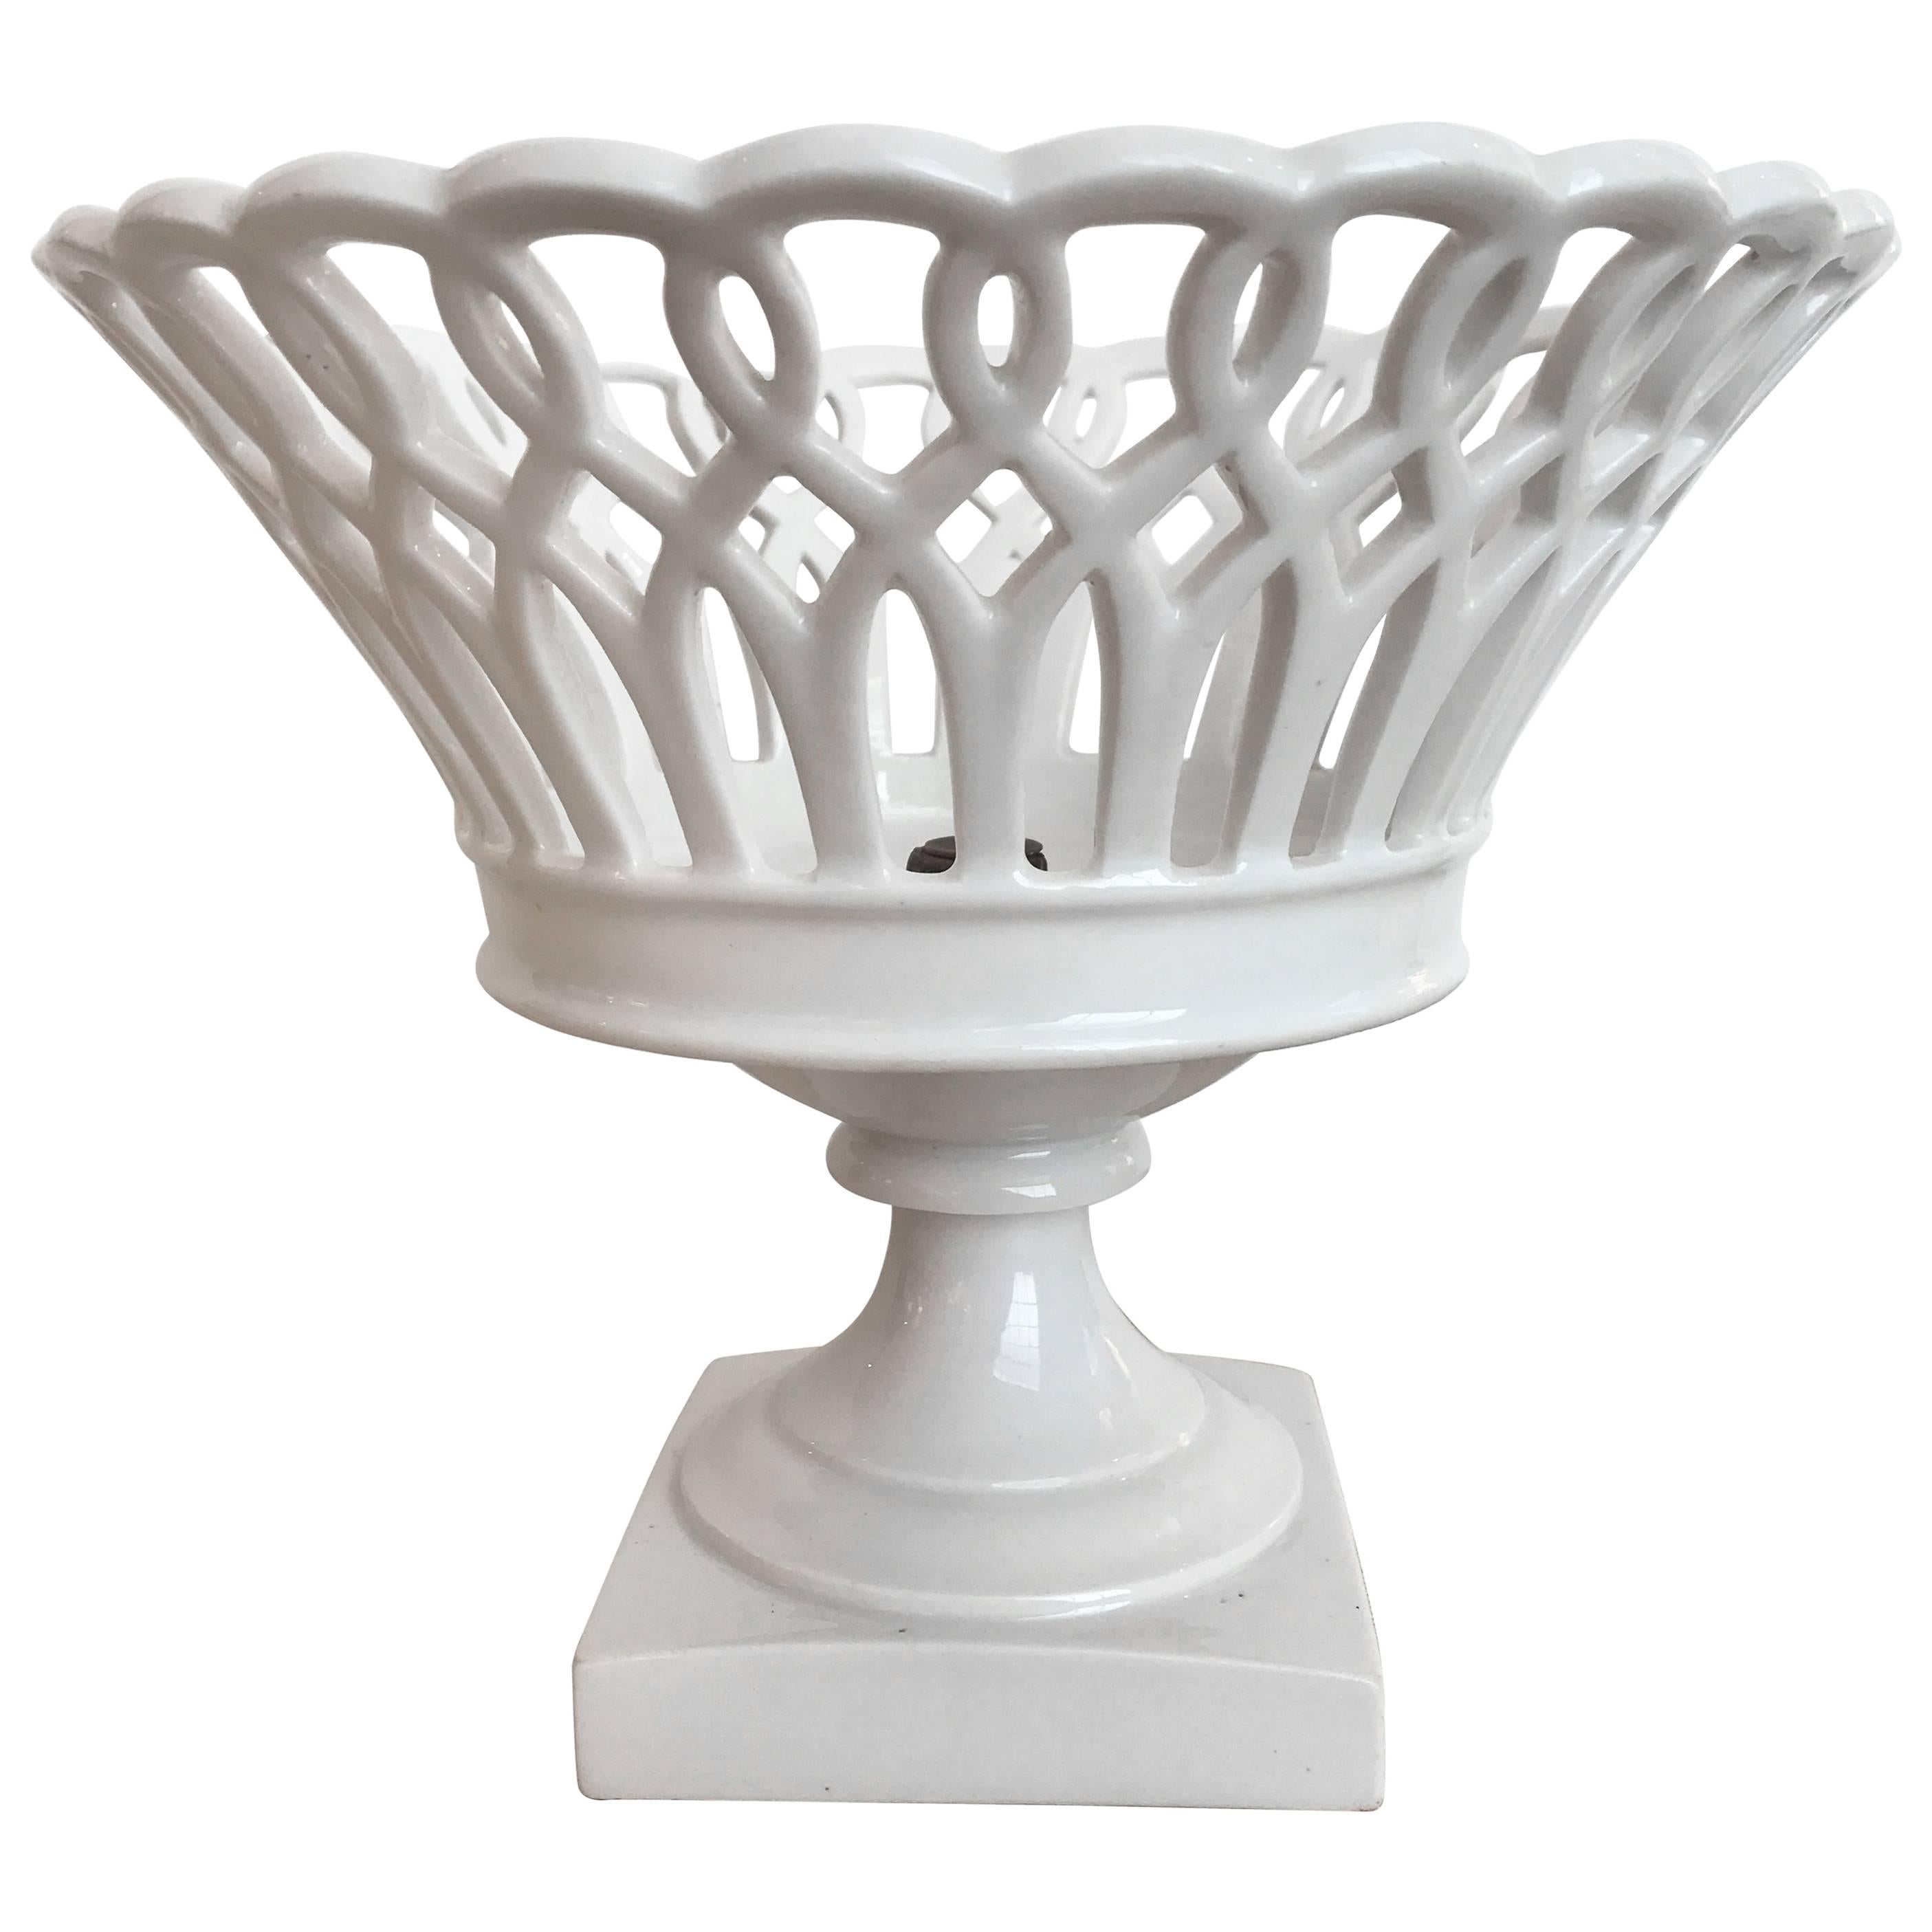 19th Century Woven Porcelain Bowl on Stand